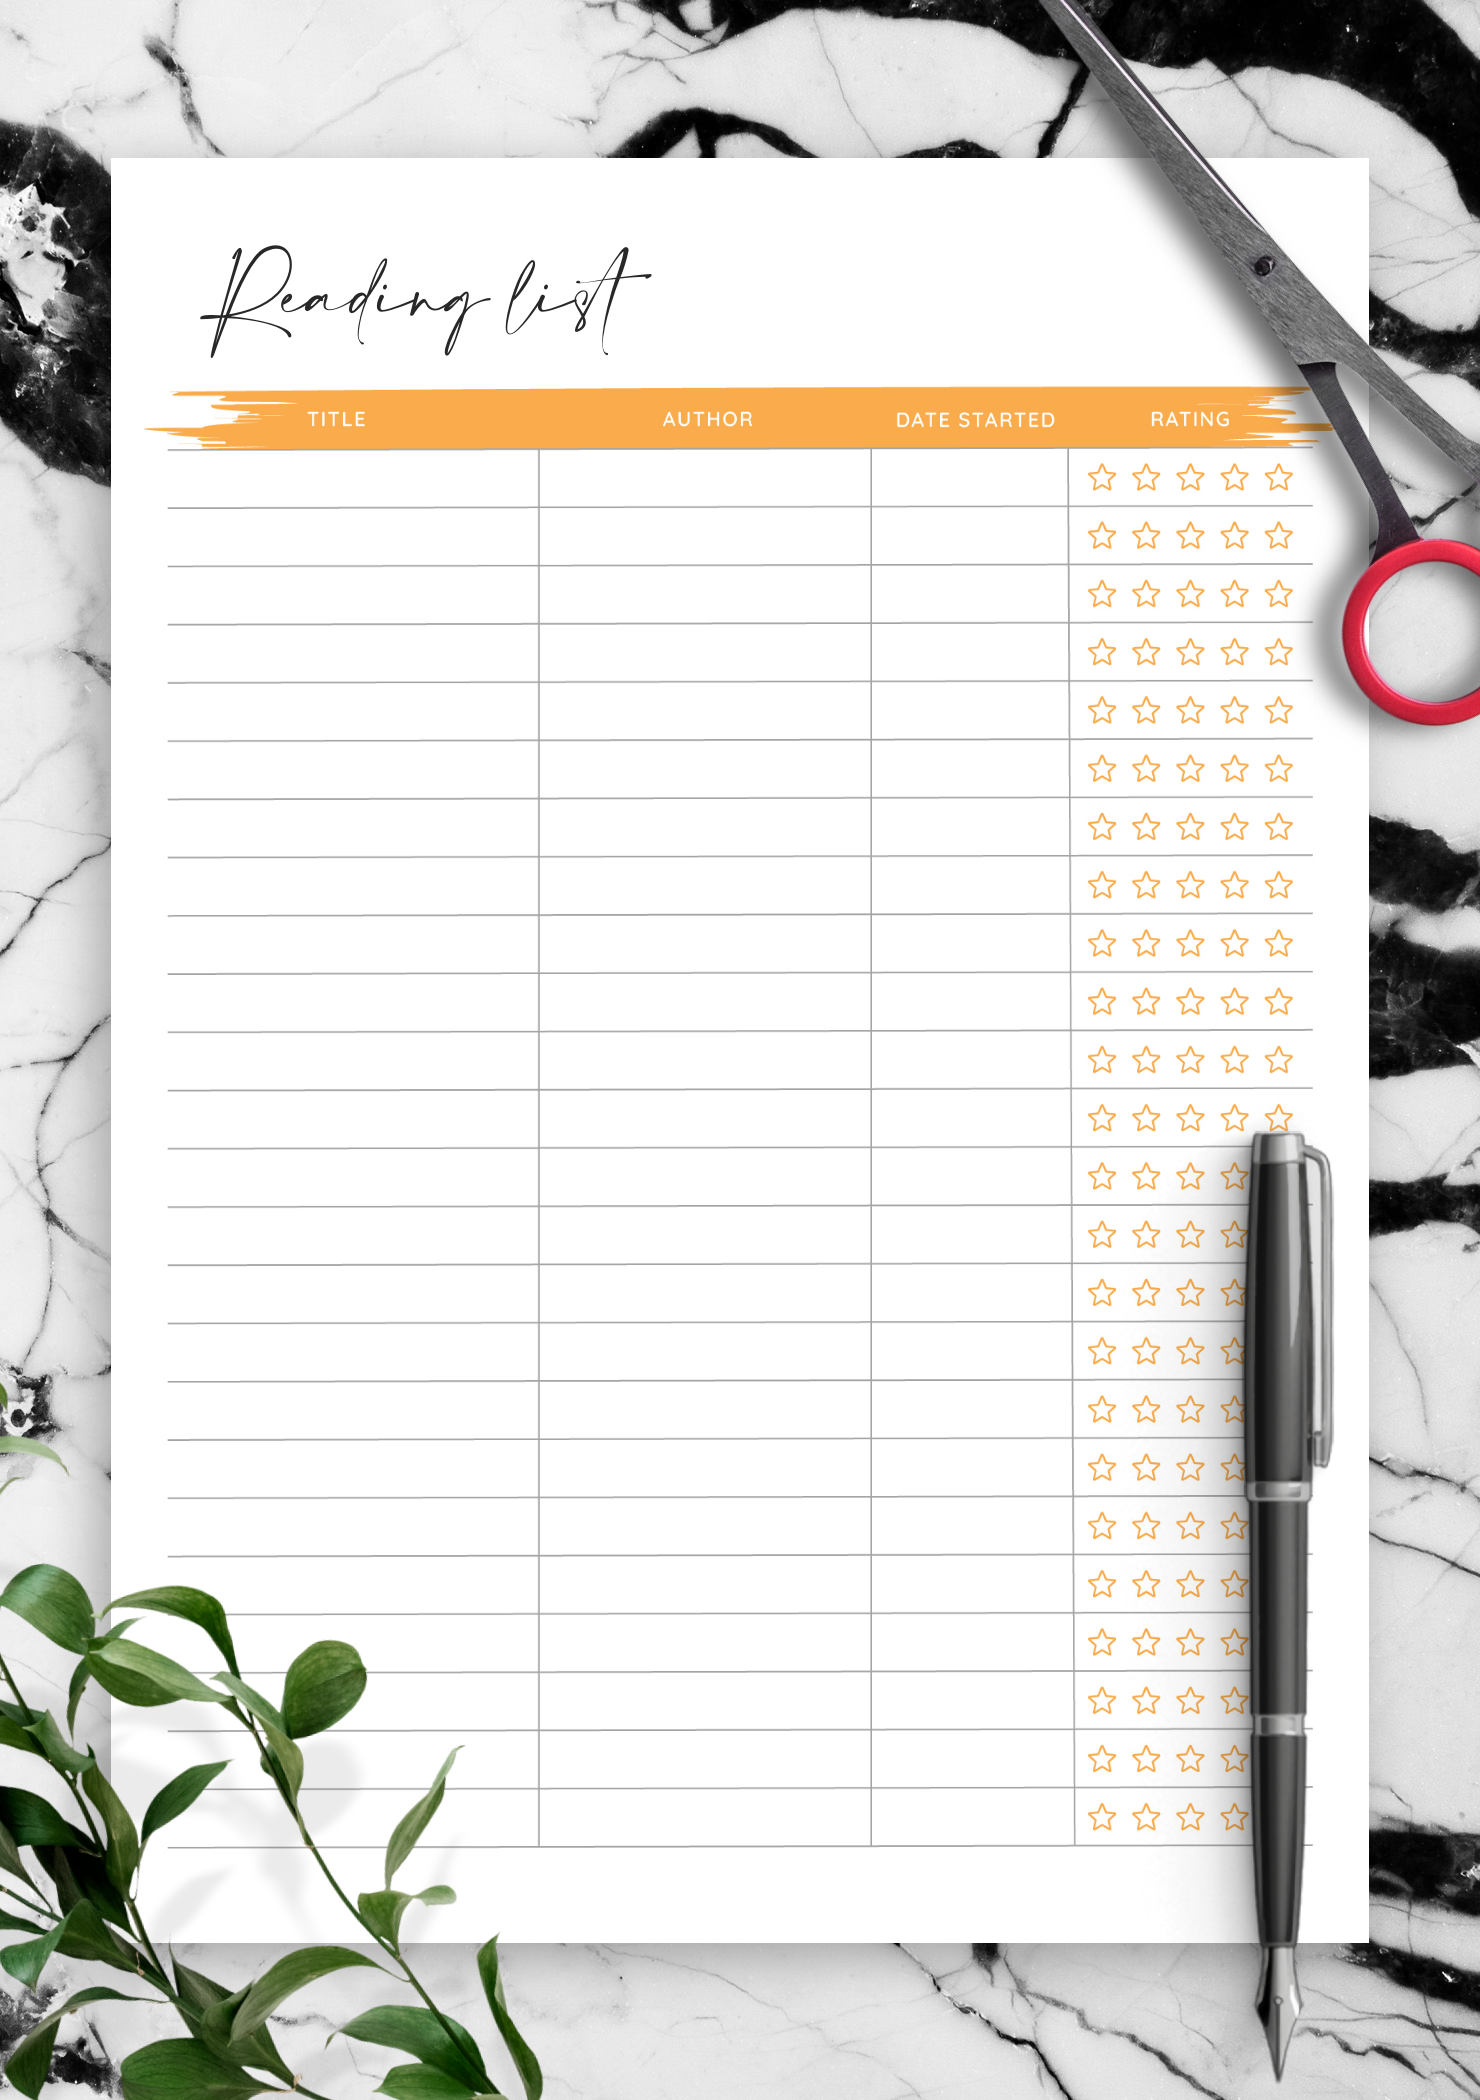 Download Printable Reading List Template with Rating Stars PDF